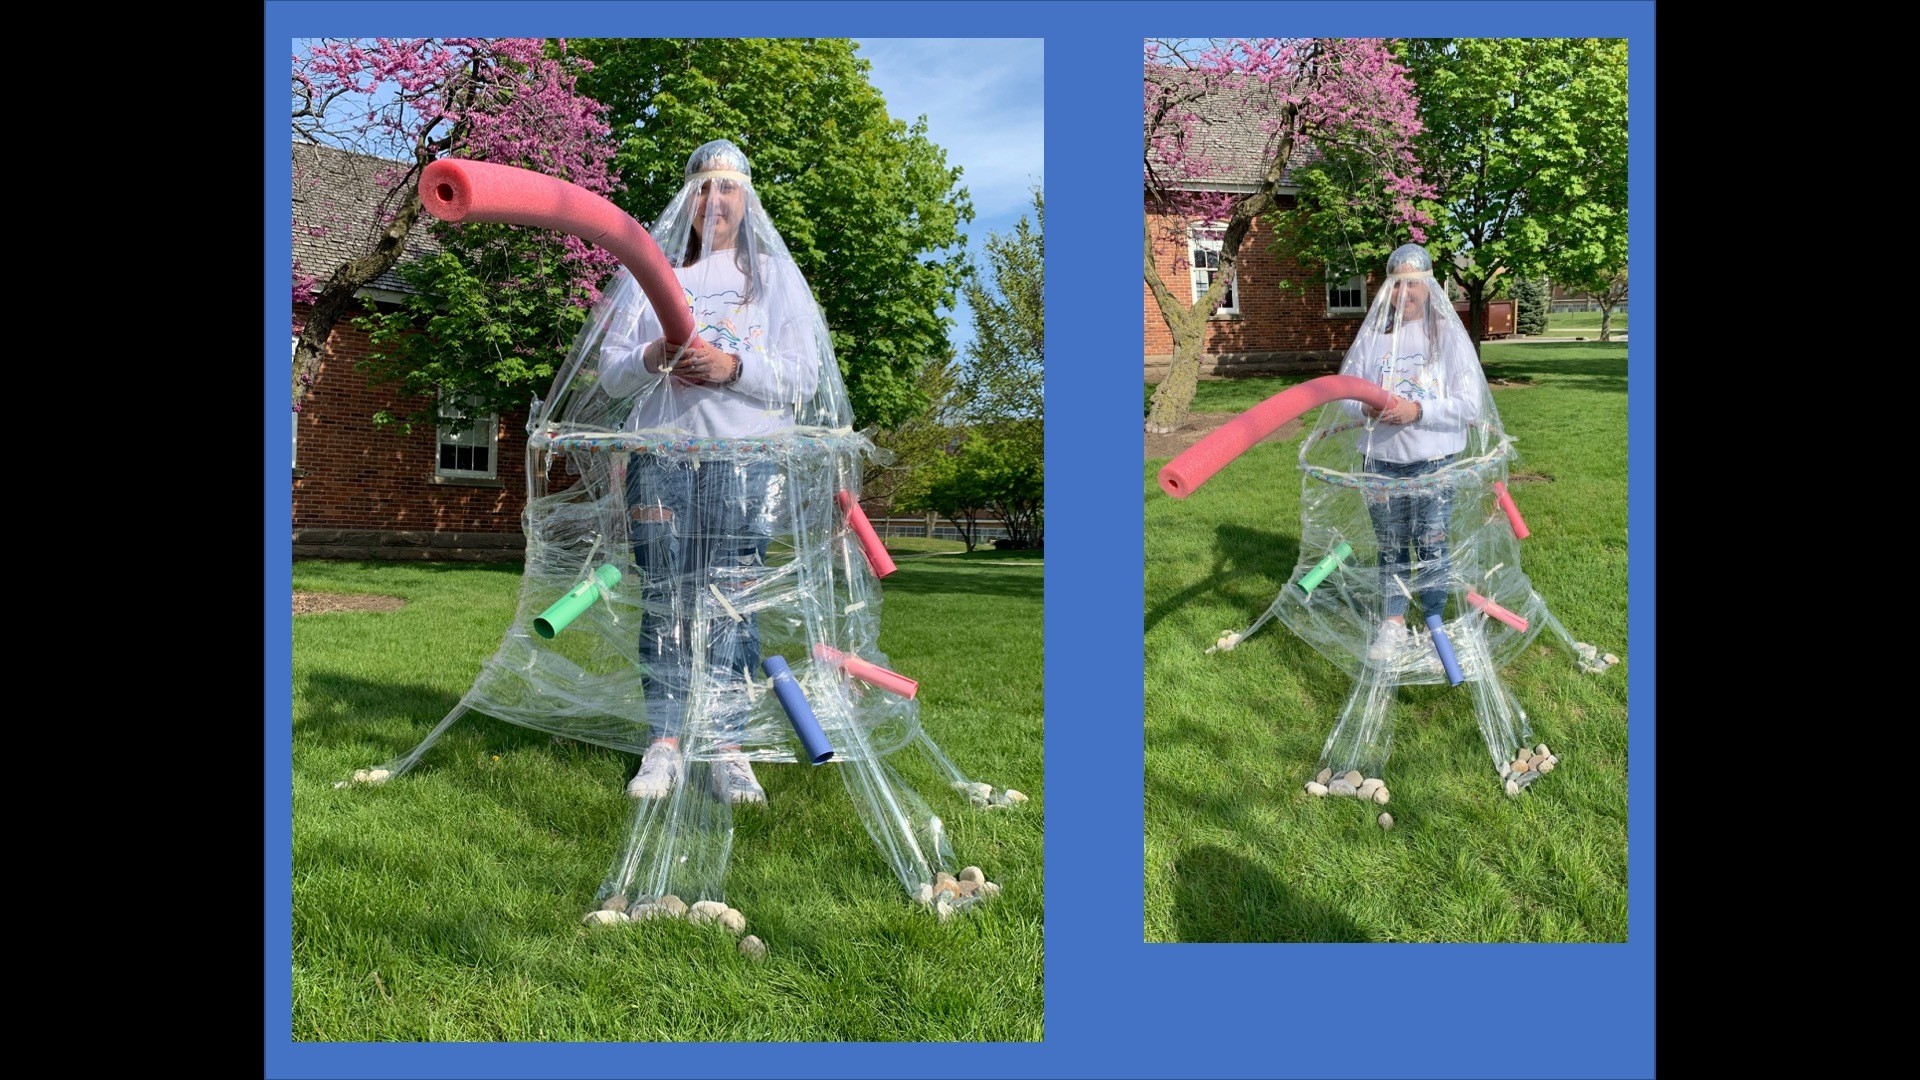 outside photo of figure wearing of plastic tent structure with swimming noodles